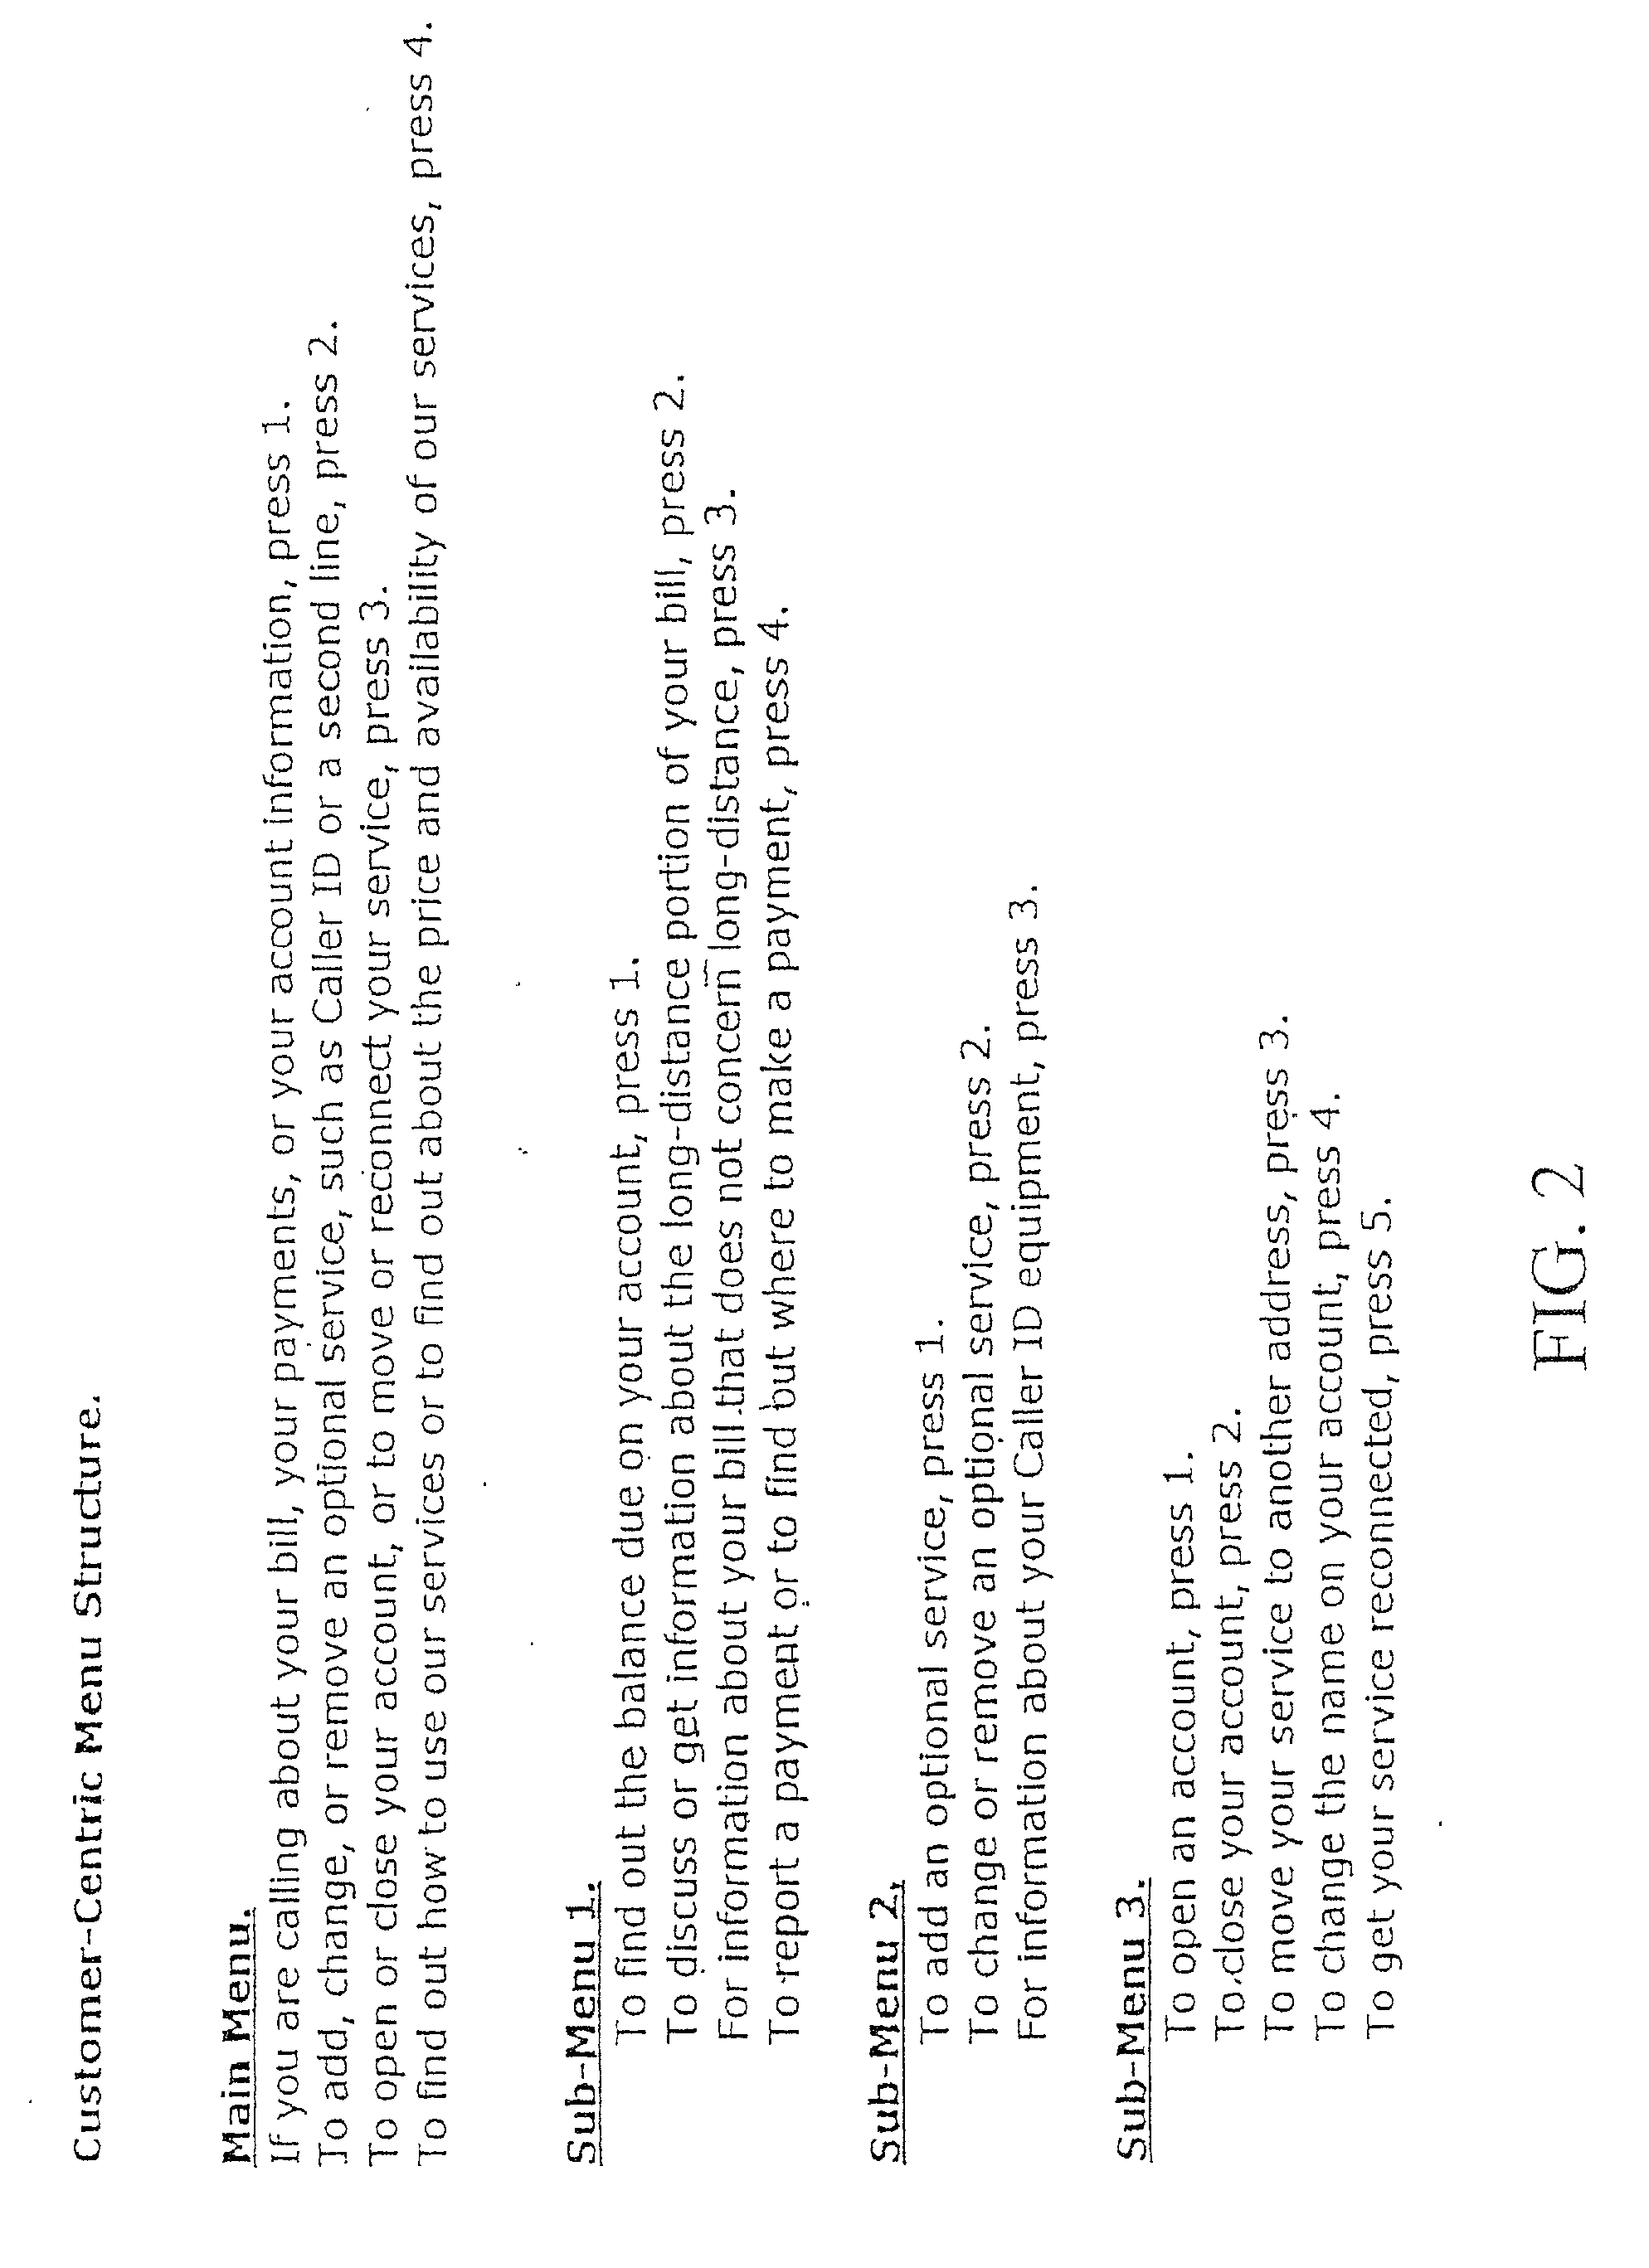 Telephone call processing in an interactive voice response call management system